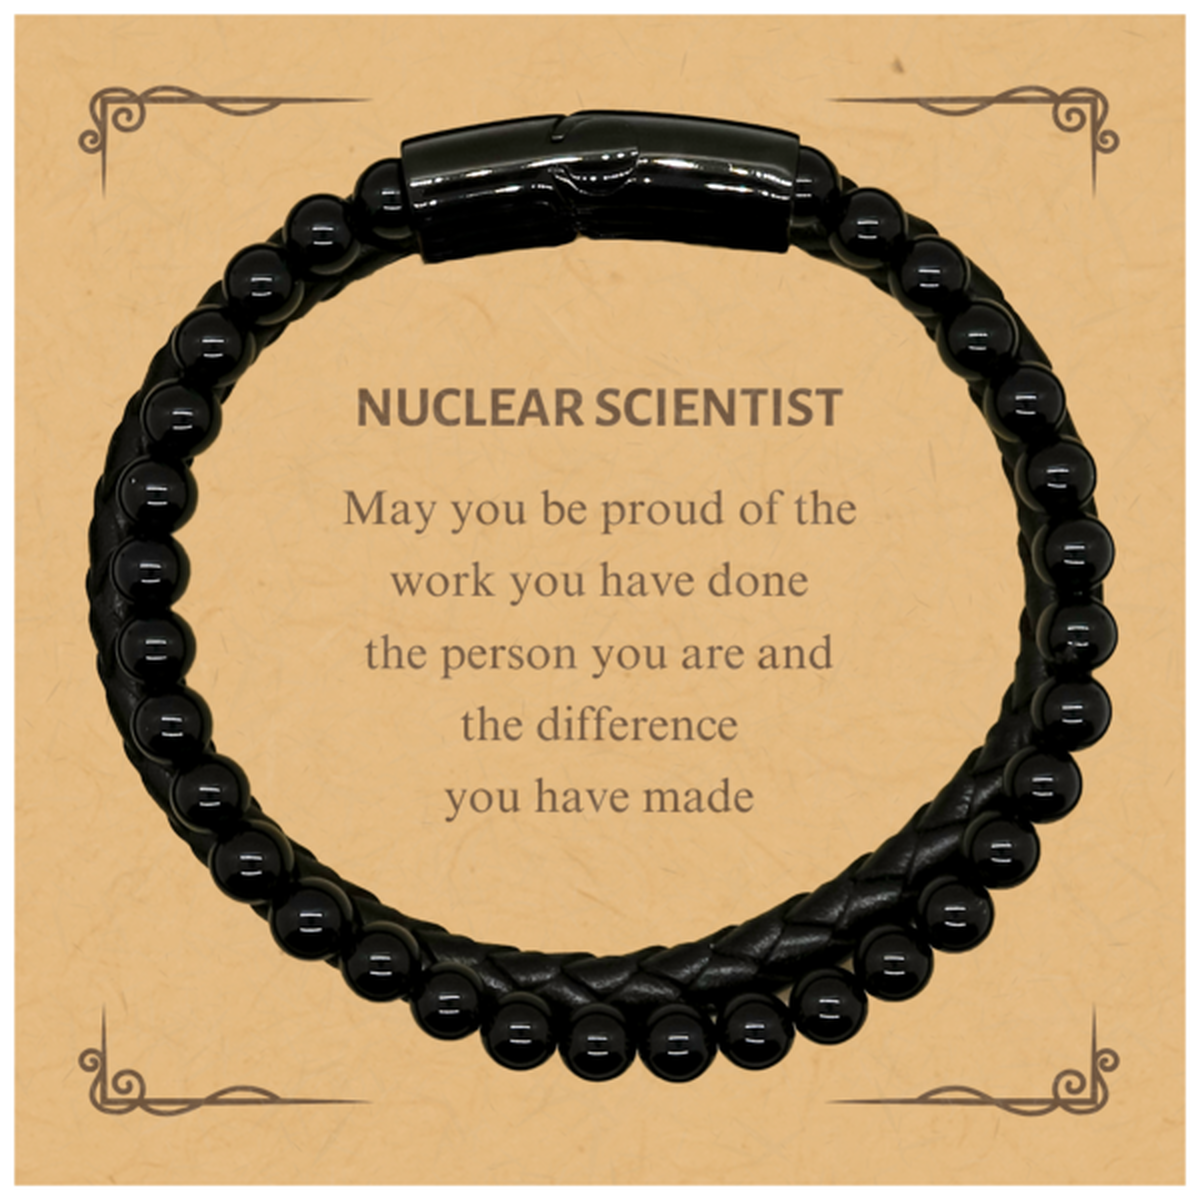 Nuclear Scientist May you be proud of the work you have done, Retirement Nuclear Scientist Stone Leather Bracelets for Colleague Appreciation Gifts Amazing for Nuclear Scientist